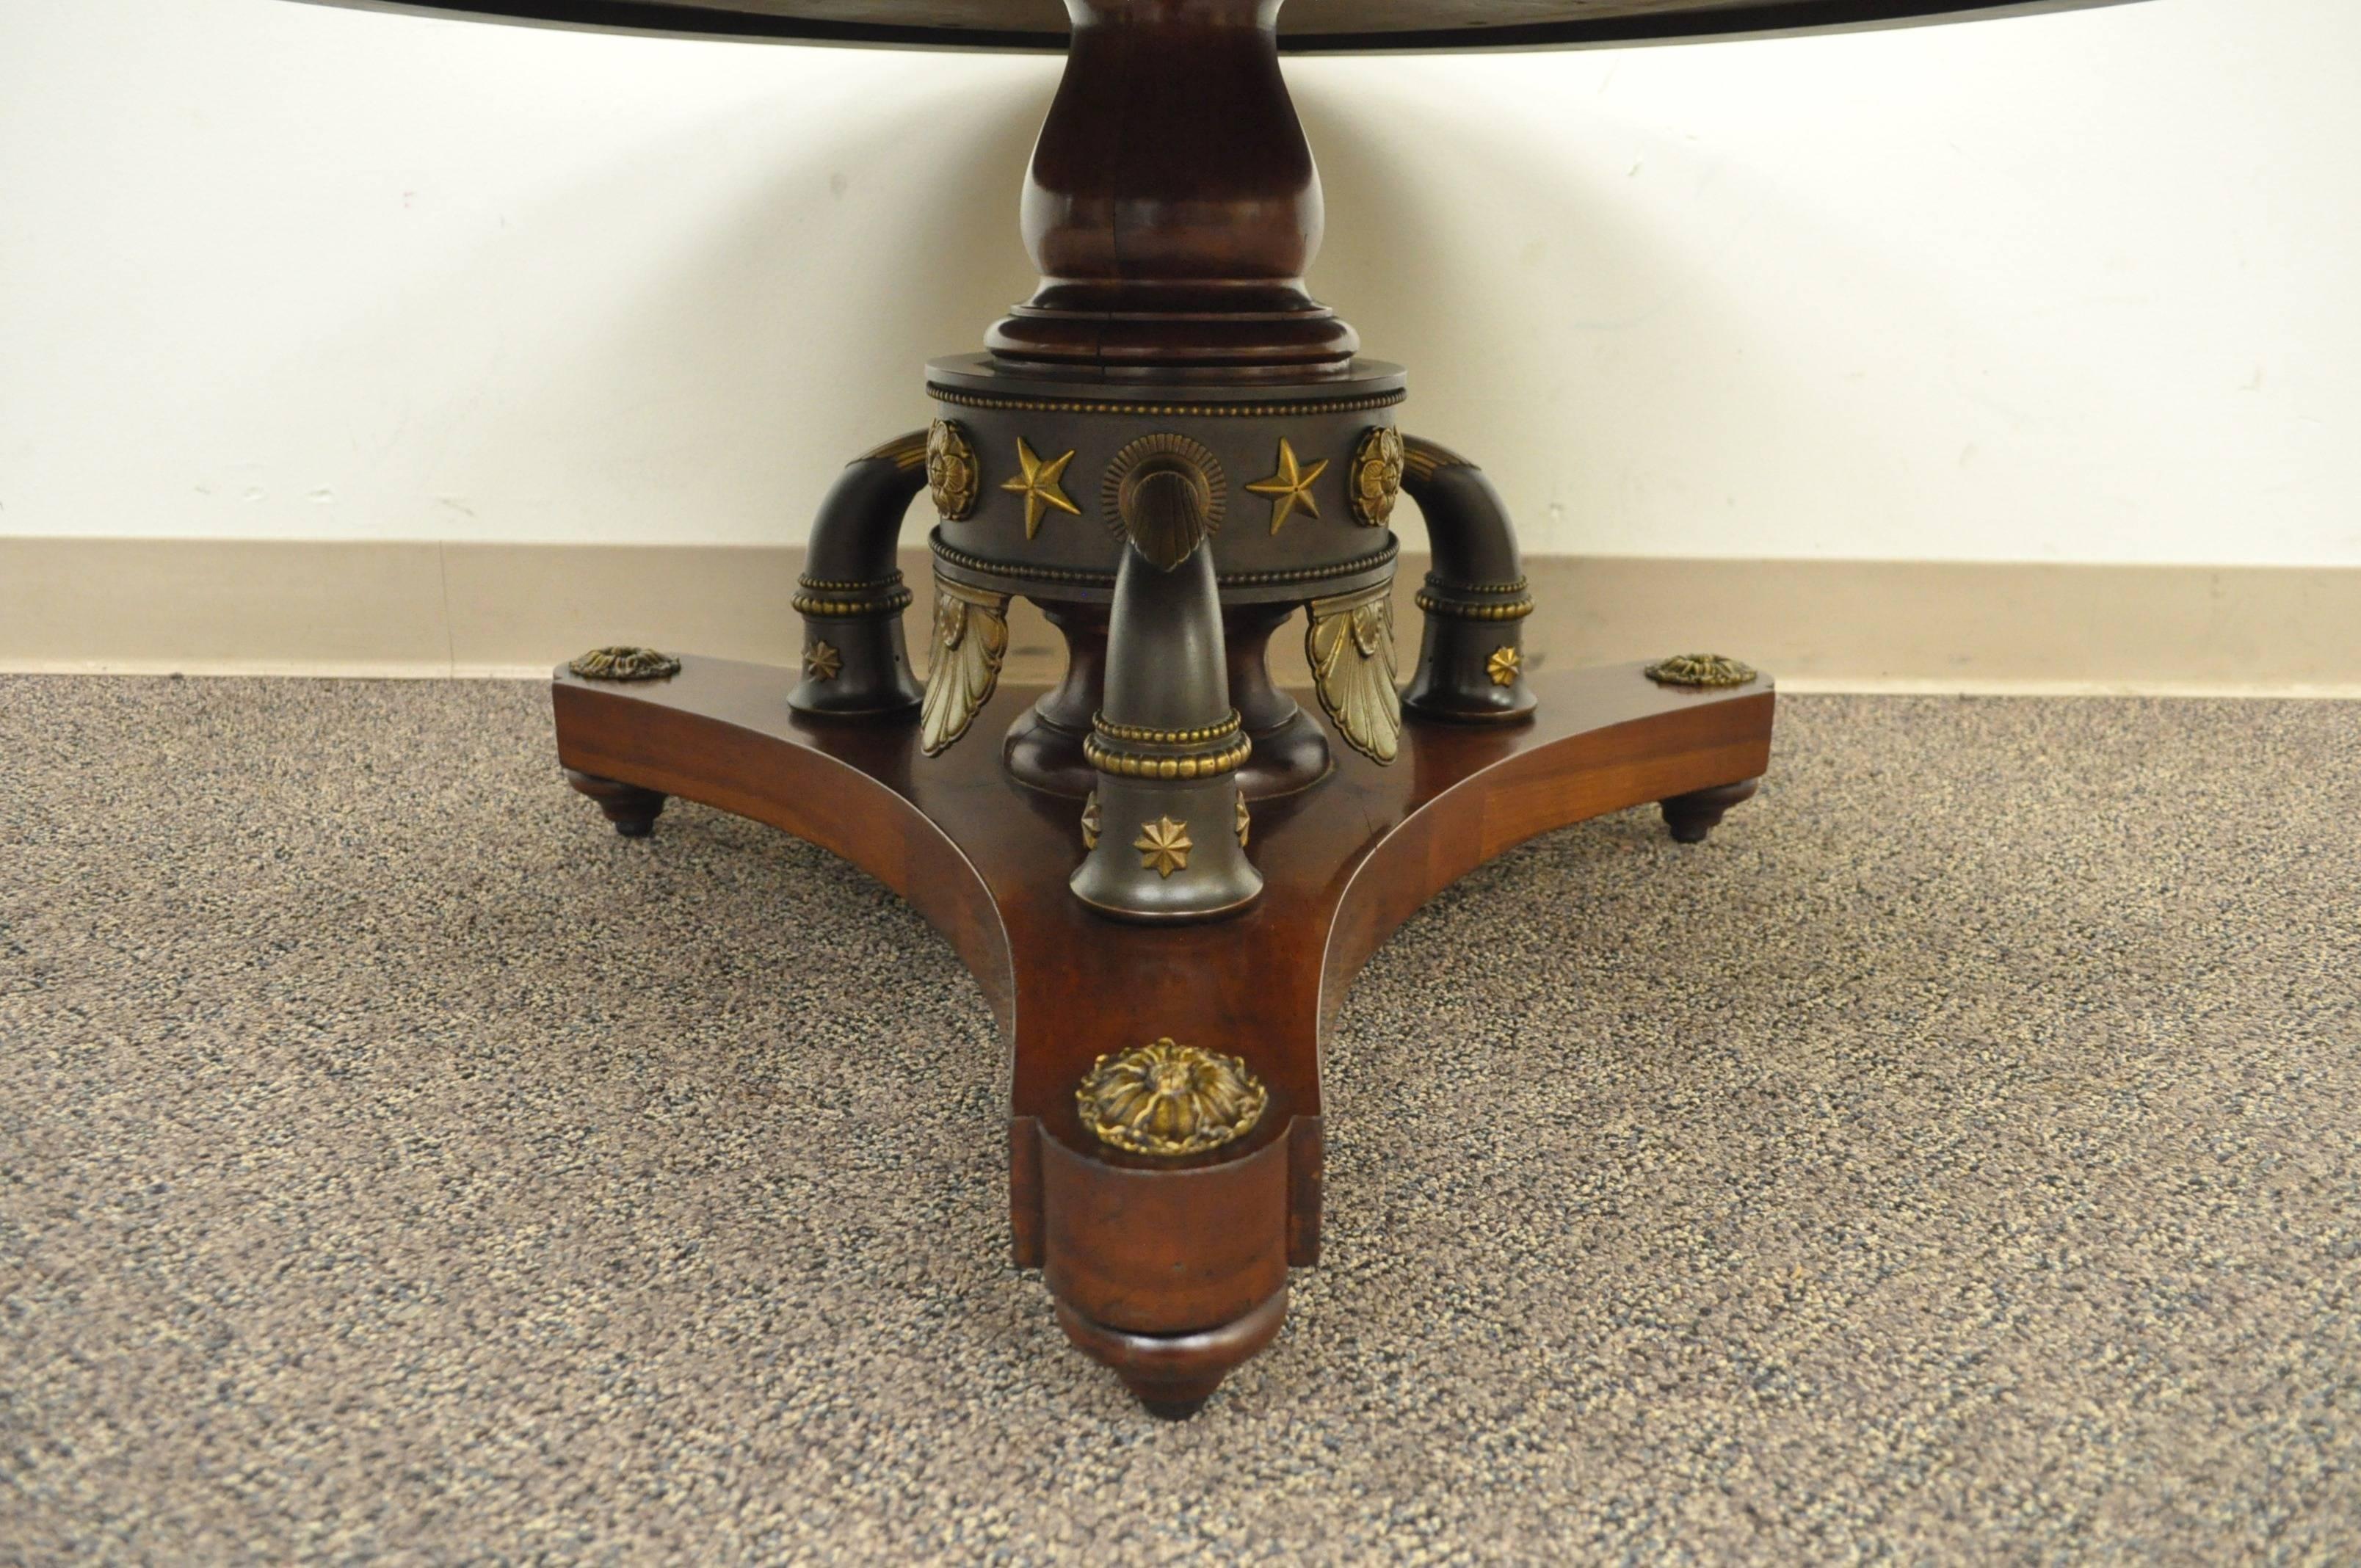 An exceptional custom made vintage coffee table with a burl wood inlaid cherry top. The base is believed to be a converted French Empire style chandelier. The feet have ball bearing casters, and are accented with bronze mountings with bronze